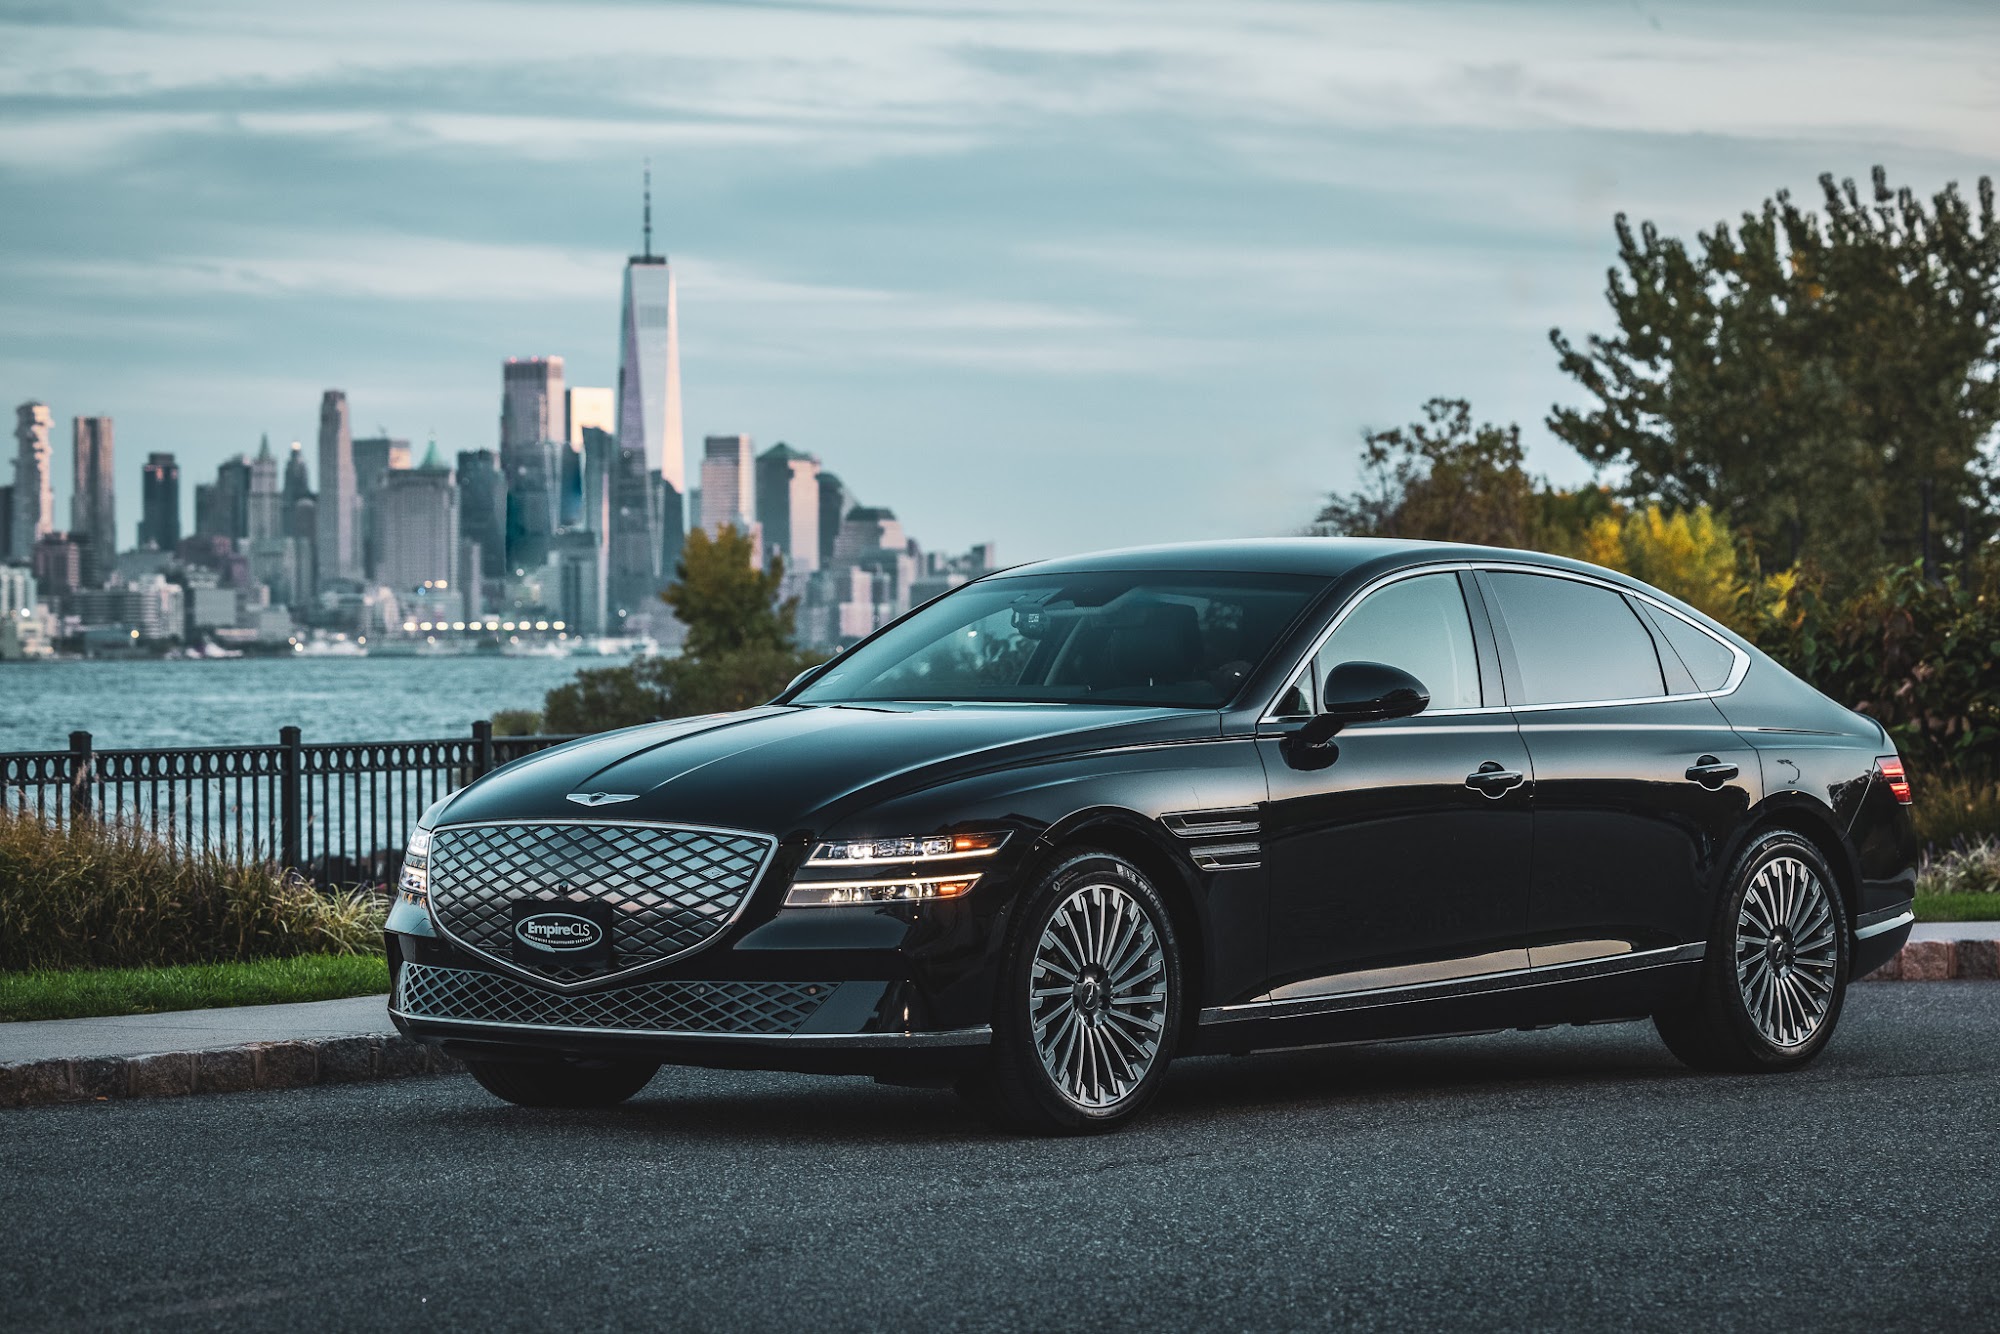 EmpireCLS Worldwide Chauffeured Services 225 Meadowlands Pkwy, Secaucus New Jersey 07094